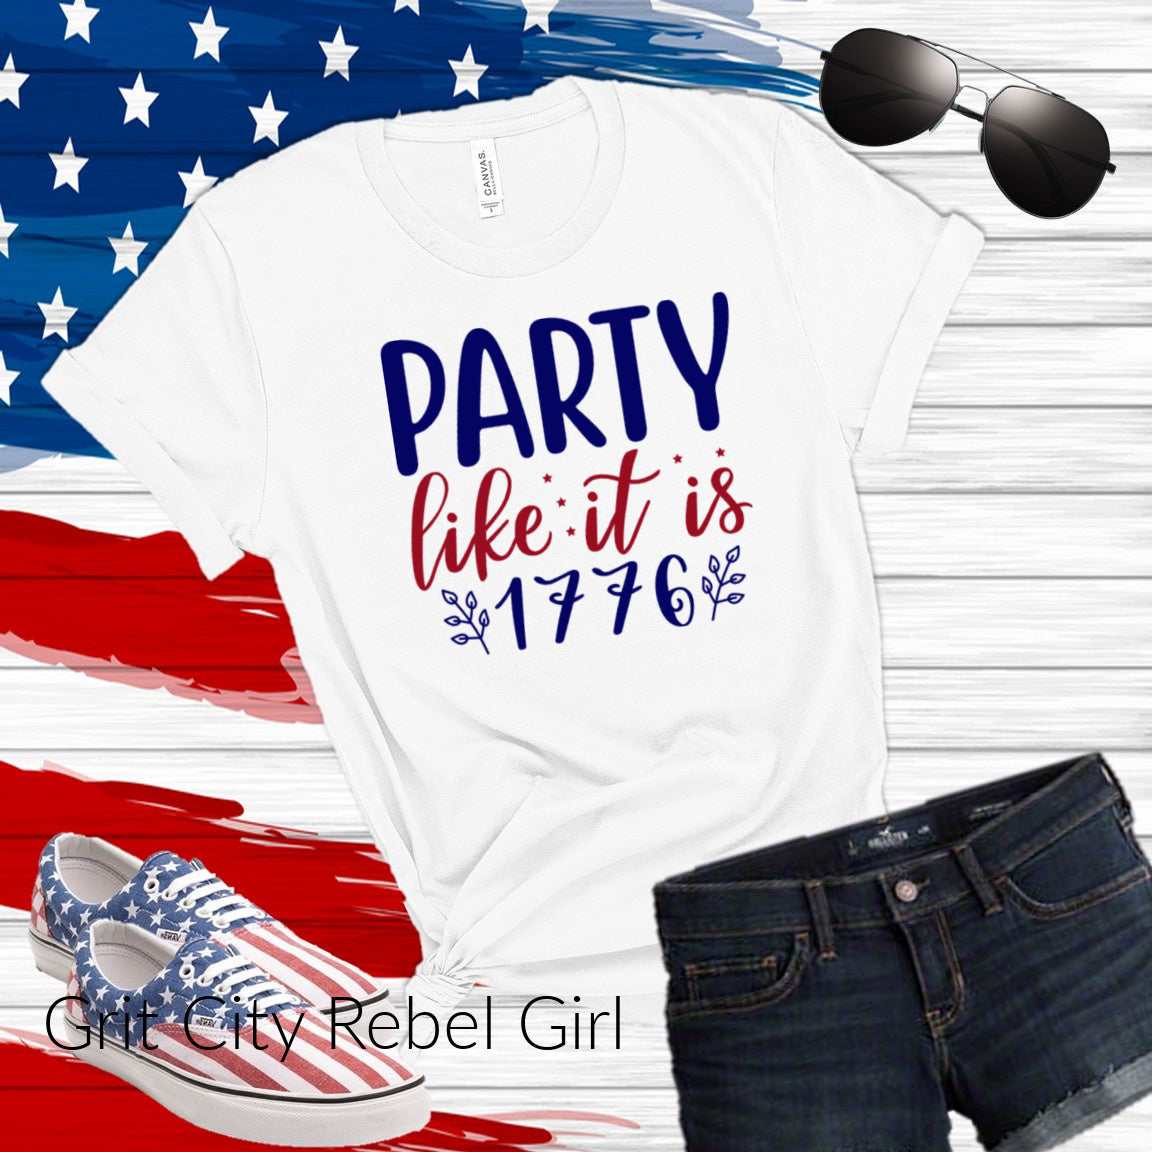 White T-Shirt with the saying in red and navy of Party like it is 1776 with leaf accents in navy